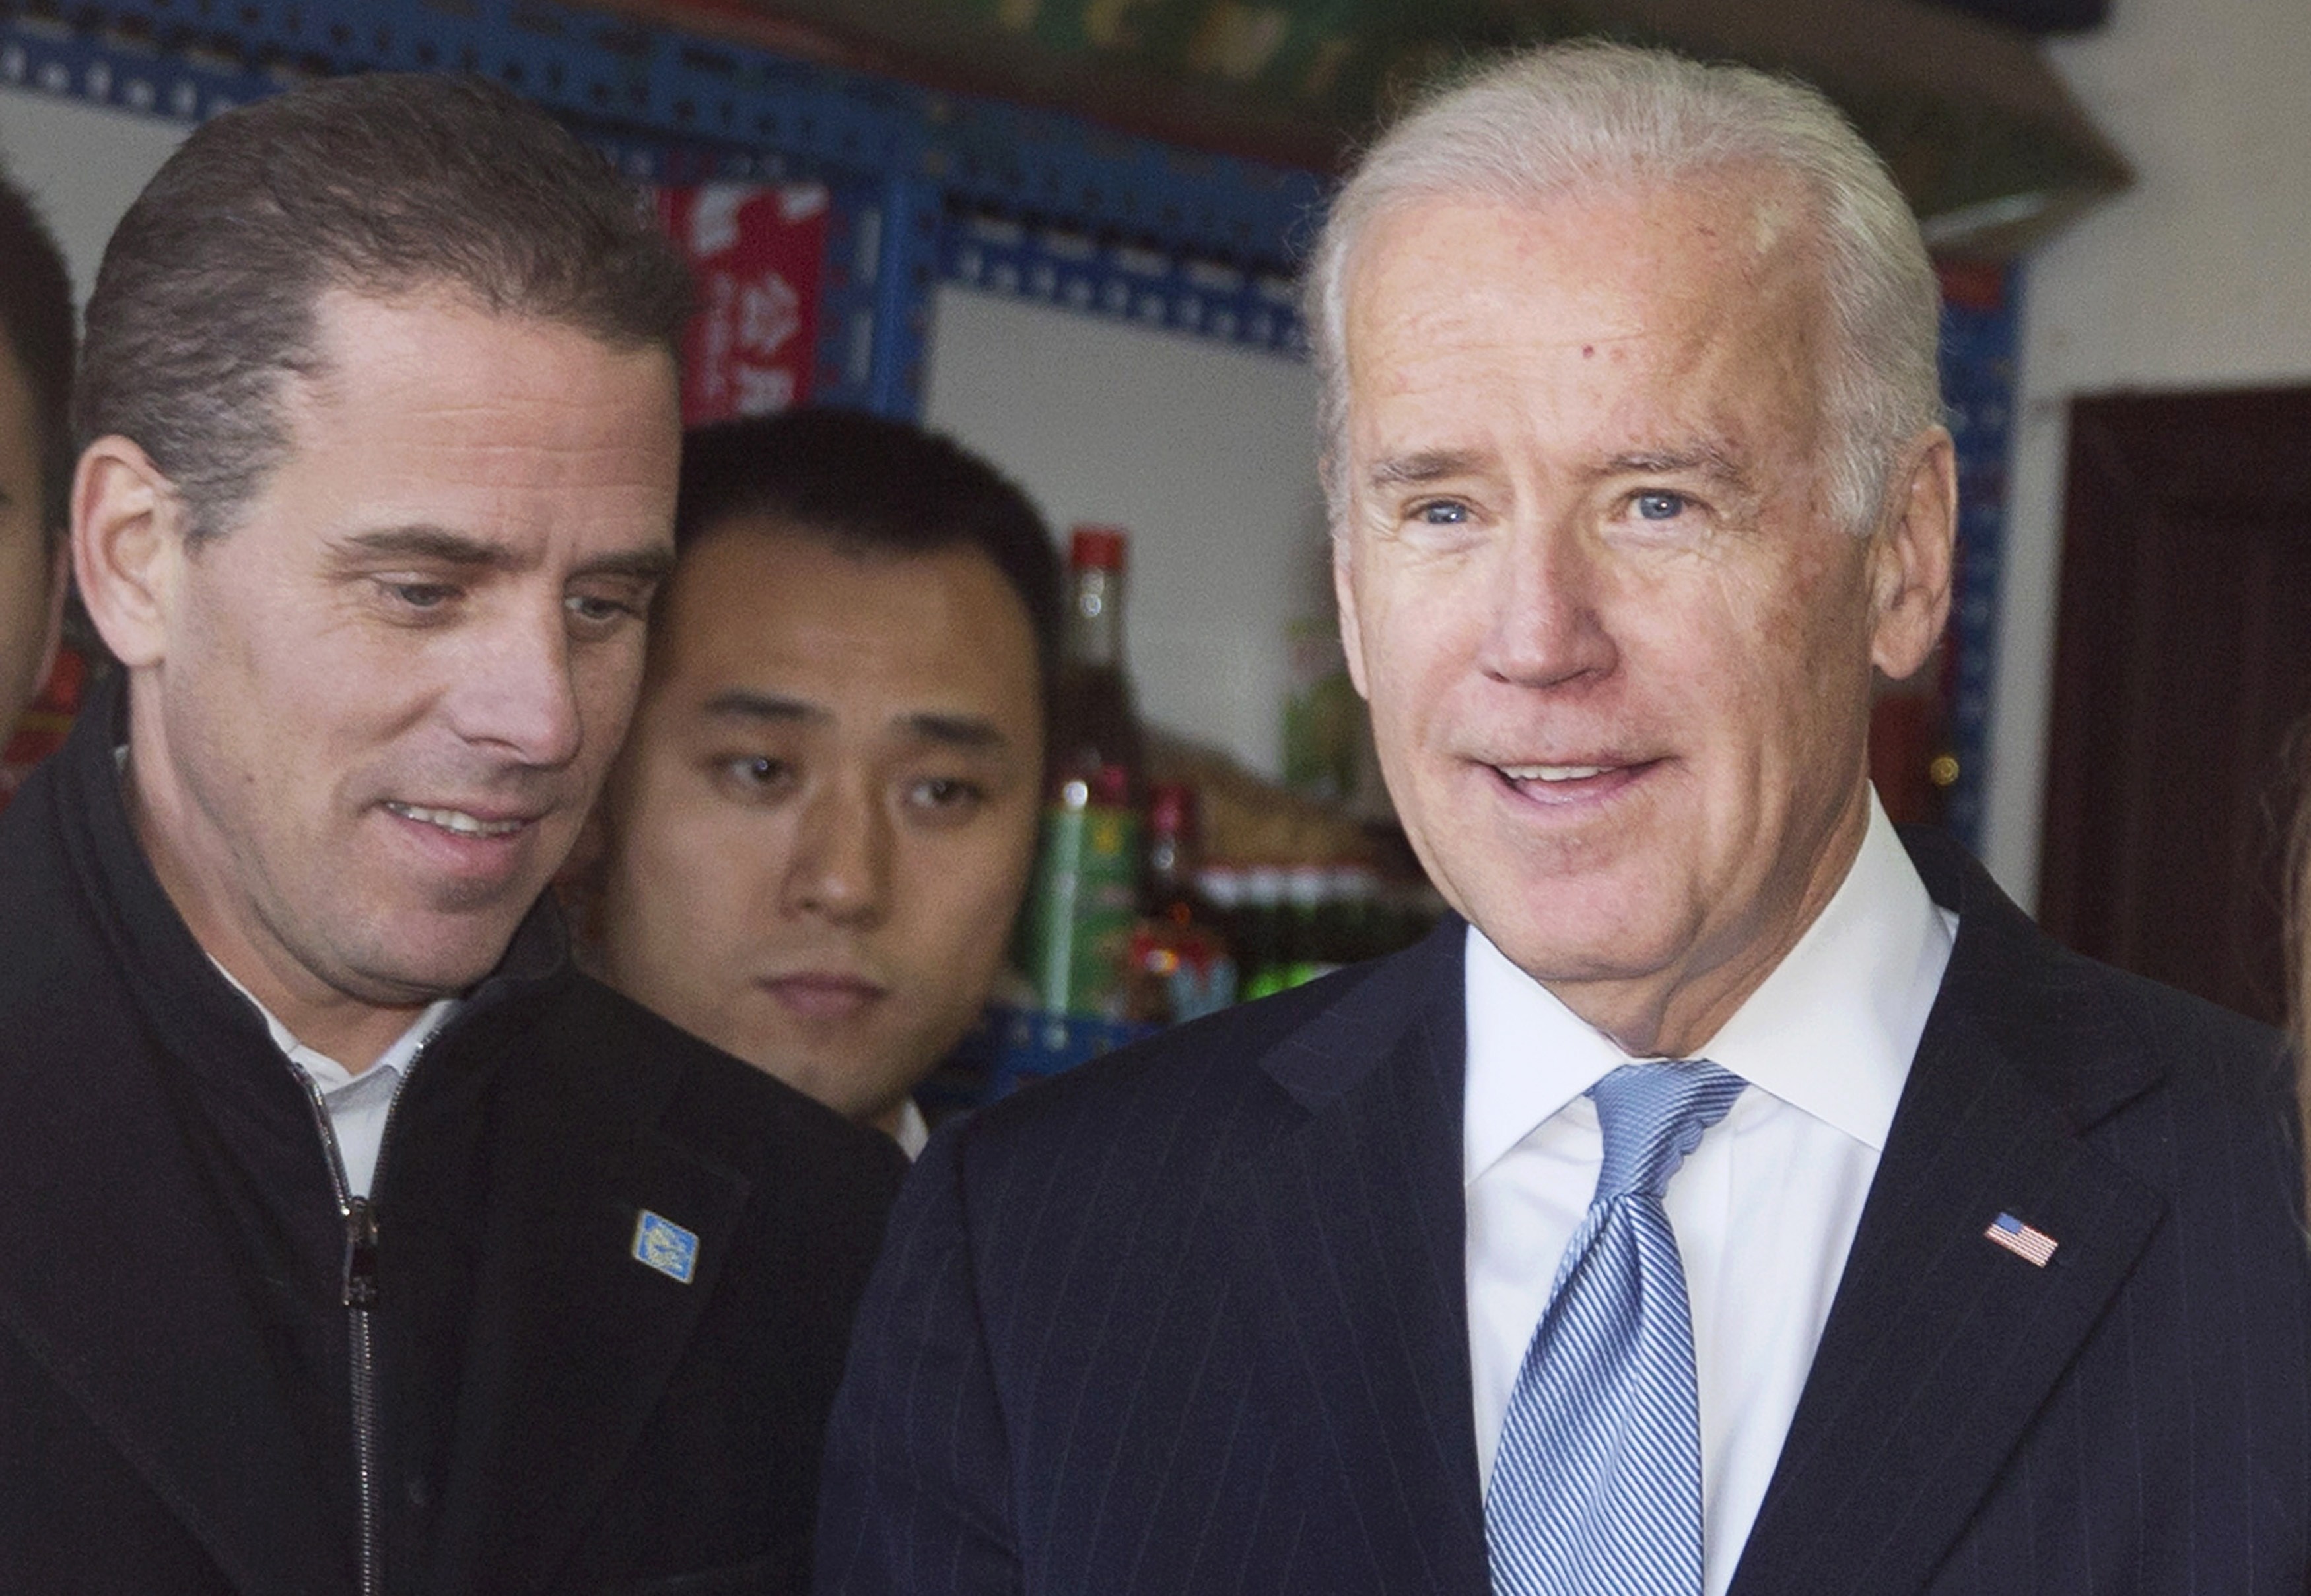 Hunter Biden and his father, Joe, during a visit to Beijing in 2013. Photo: EPA